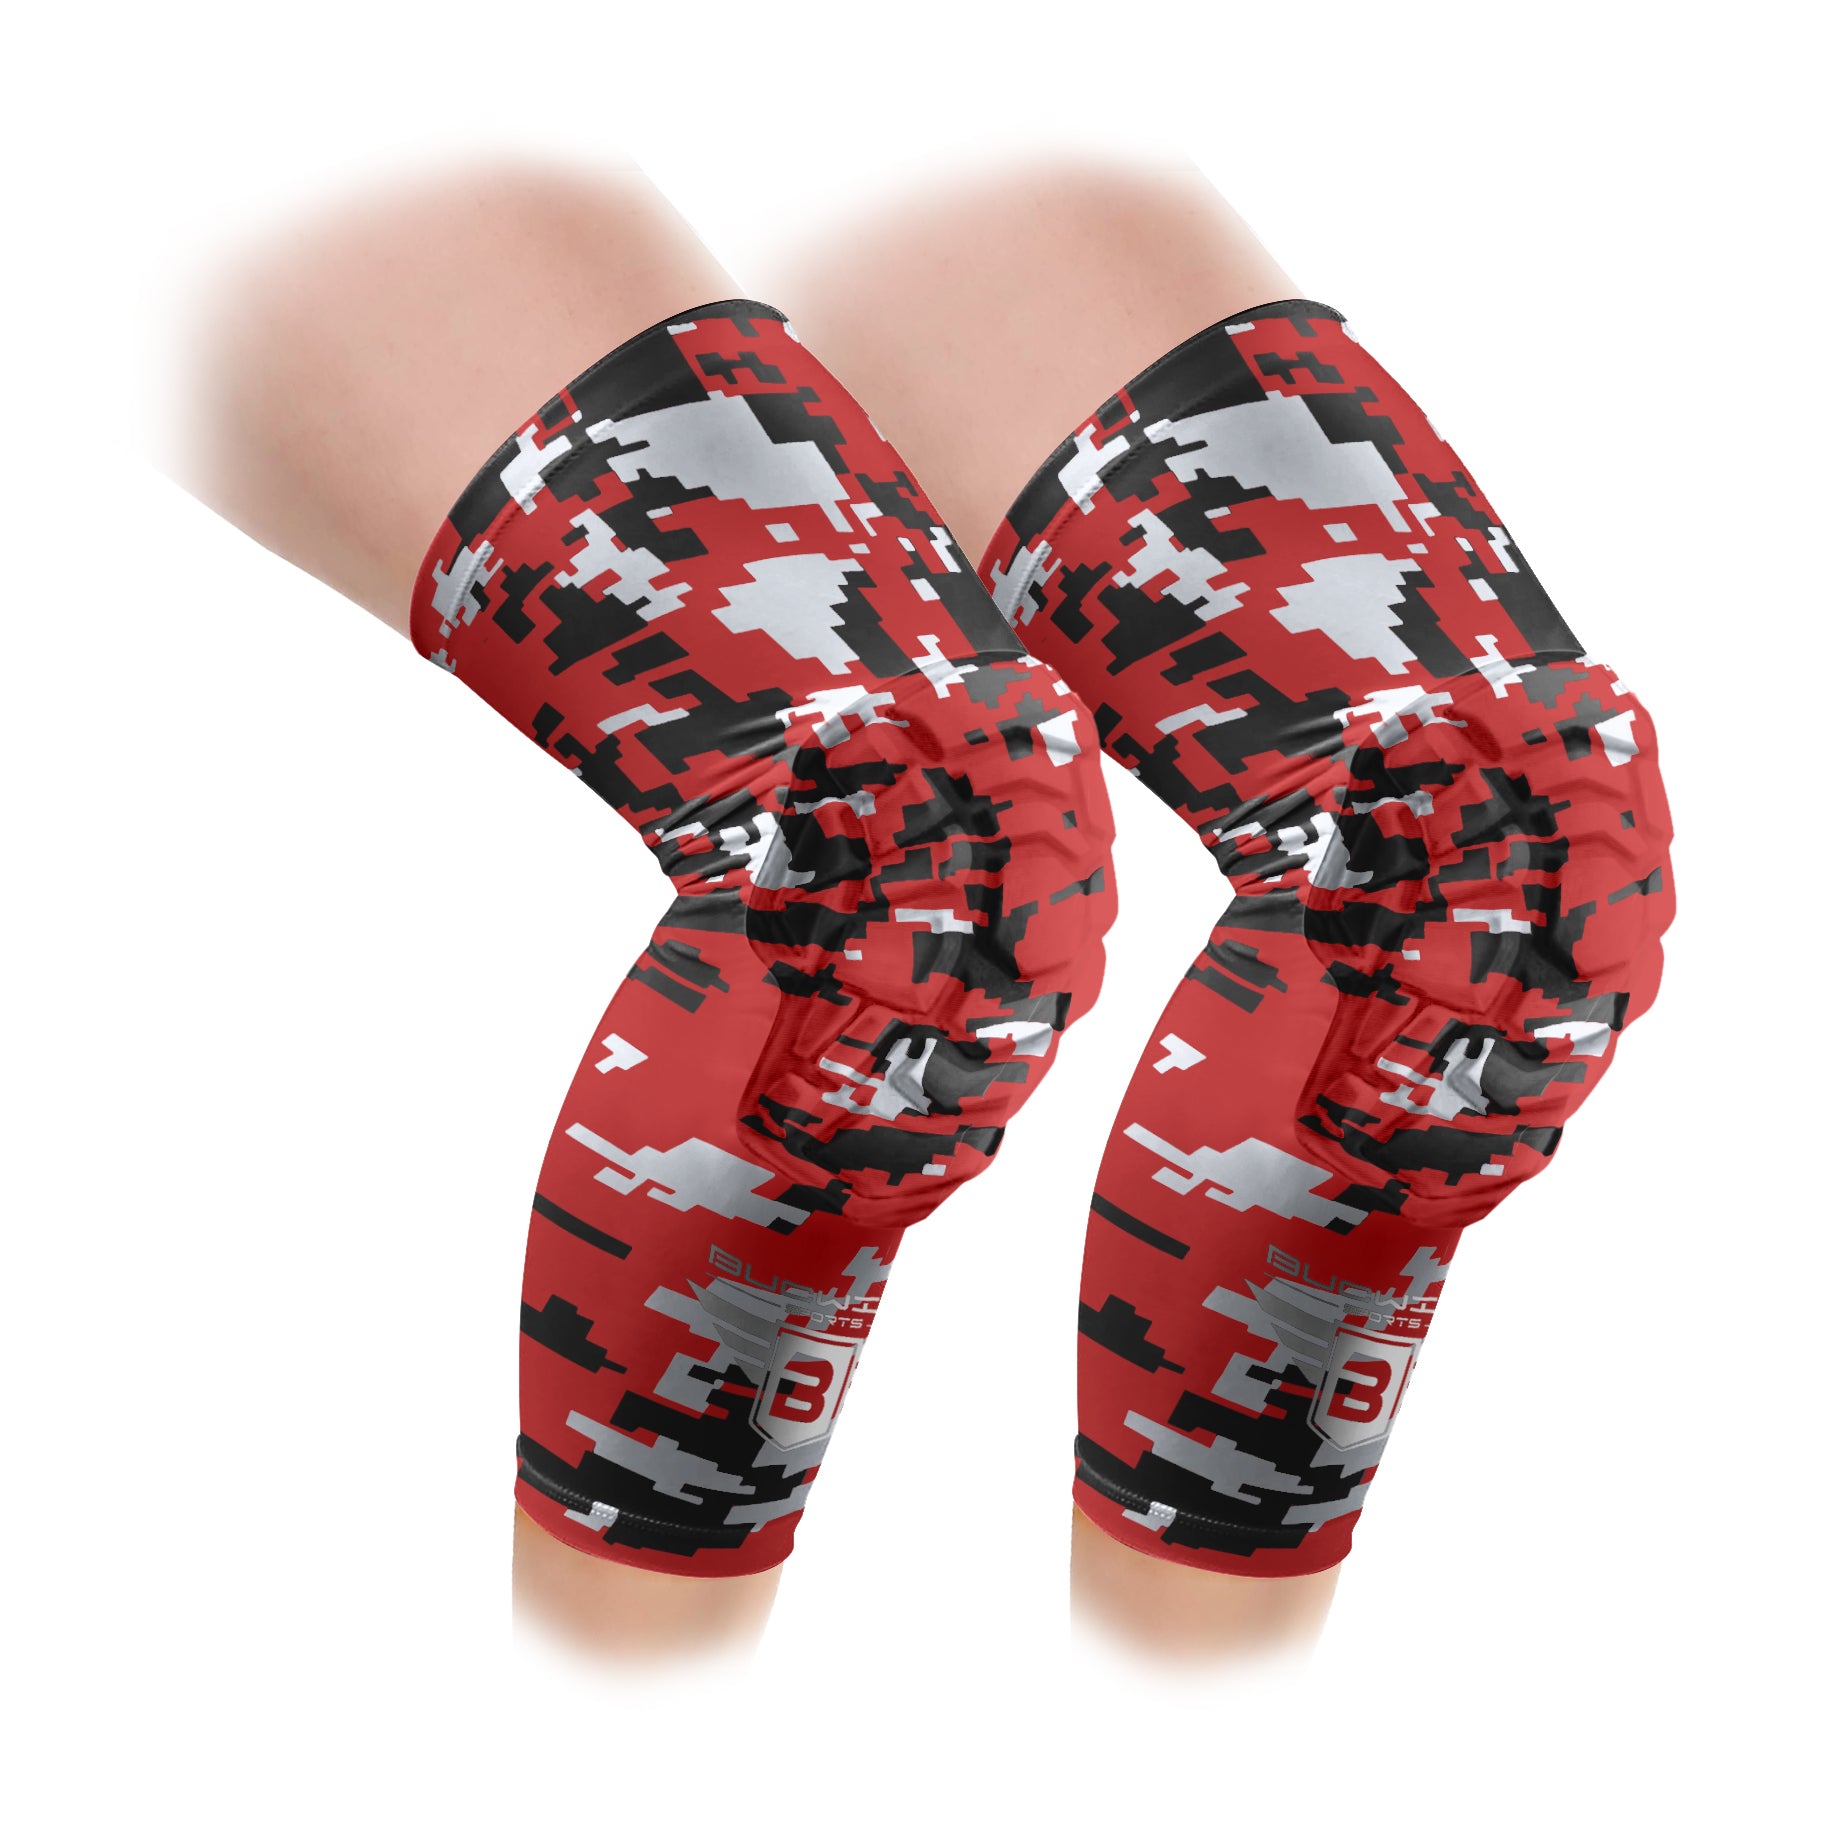 Red Digital Camo Compression Knee Pads - Padded Leg Sleeves (1 Pair)